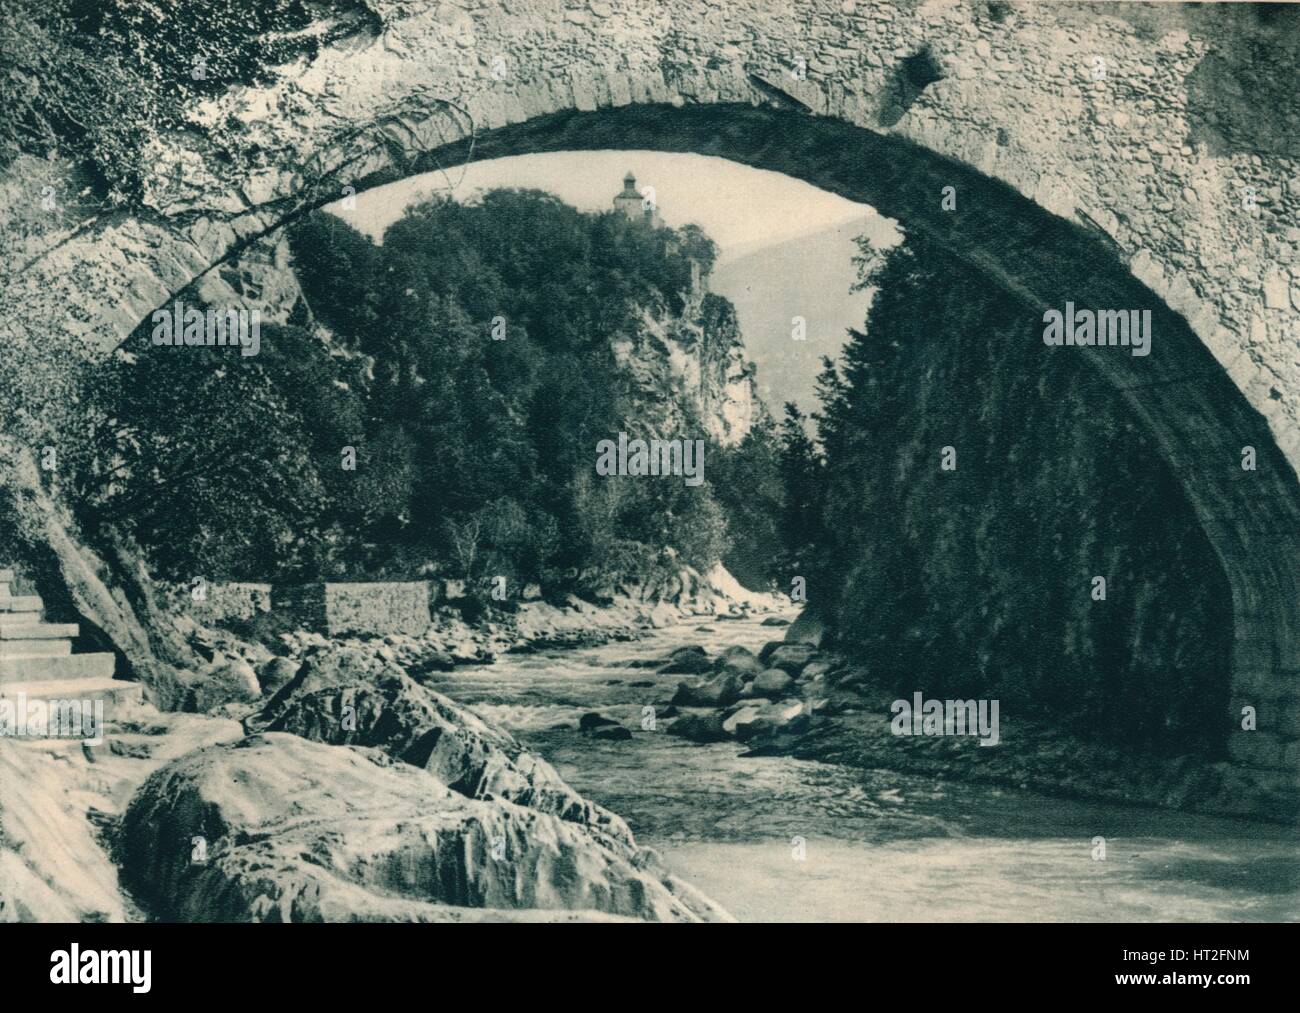 The Passer River and the Castle of Zeno, Merano, South Tyrol,  Italy, 1927. Artist: Eugen Poppel. Stock Photo